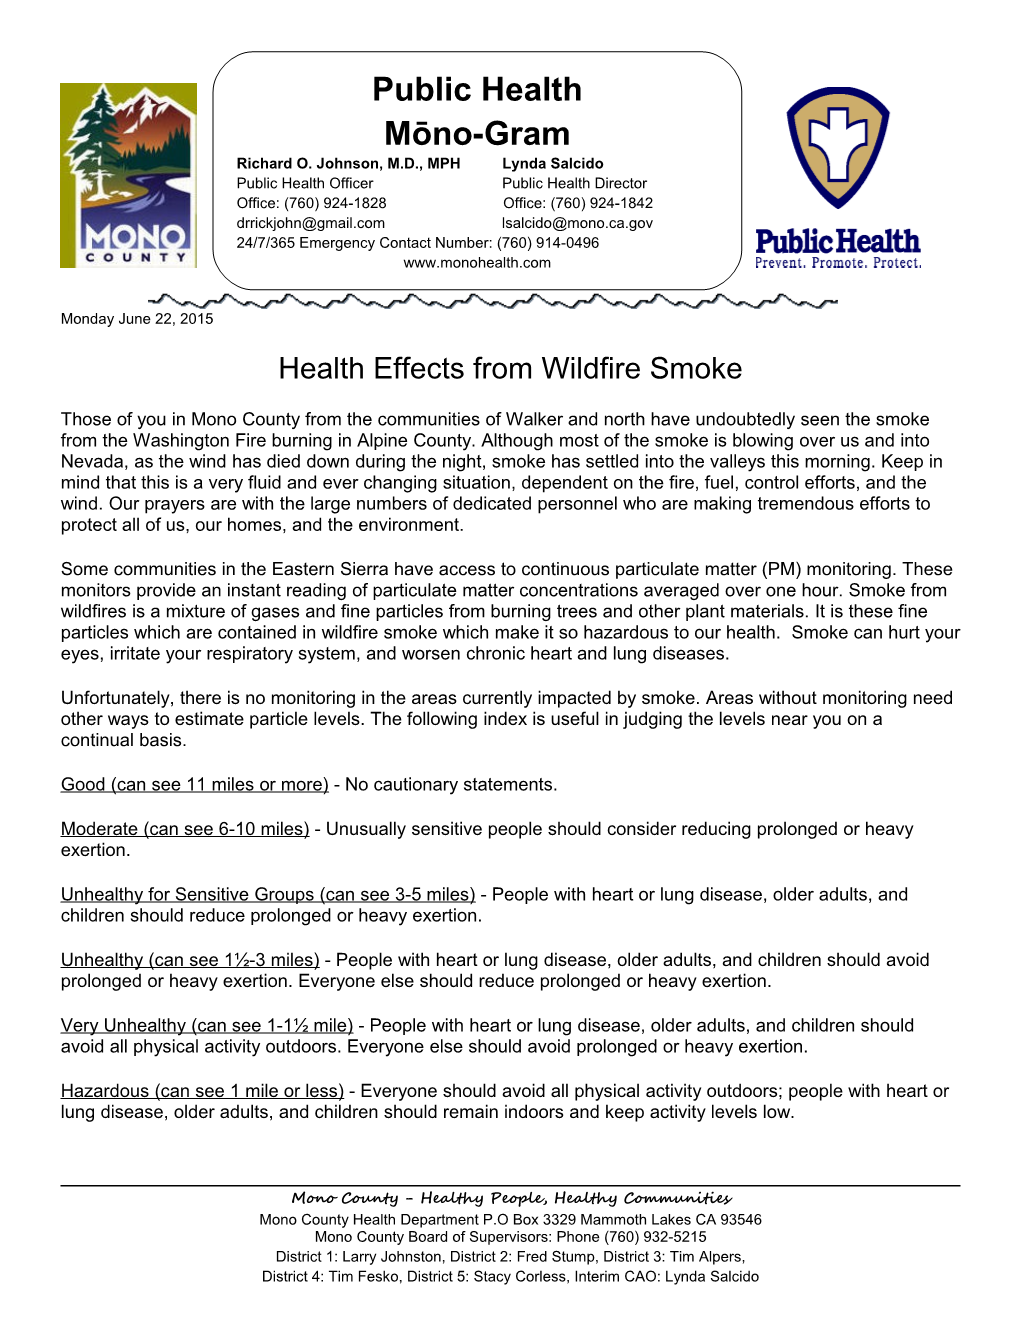 Health Effects from Wildfire Smoke